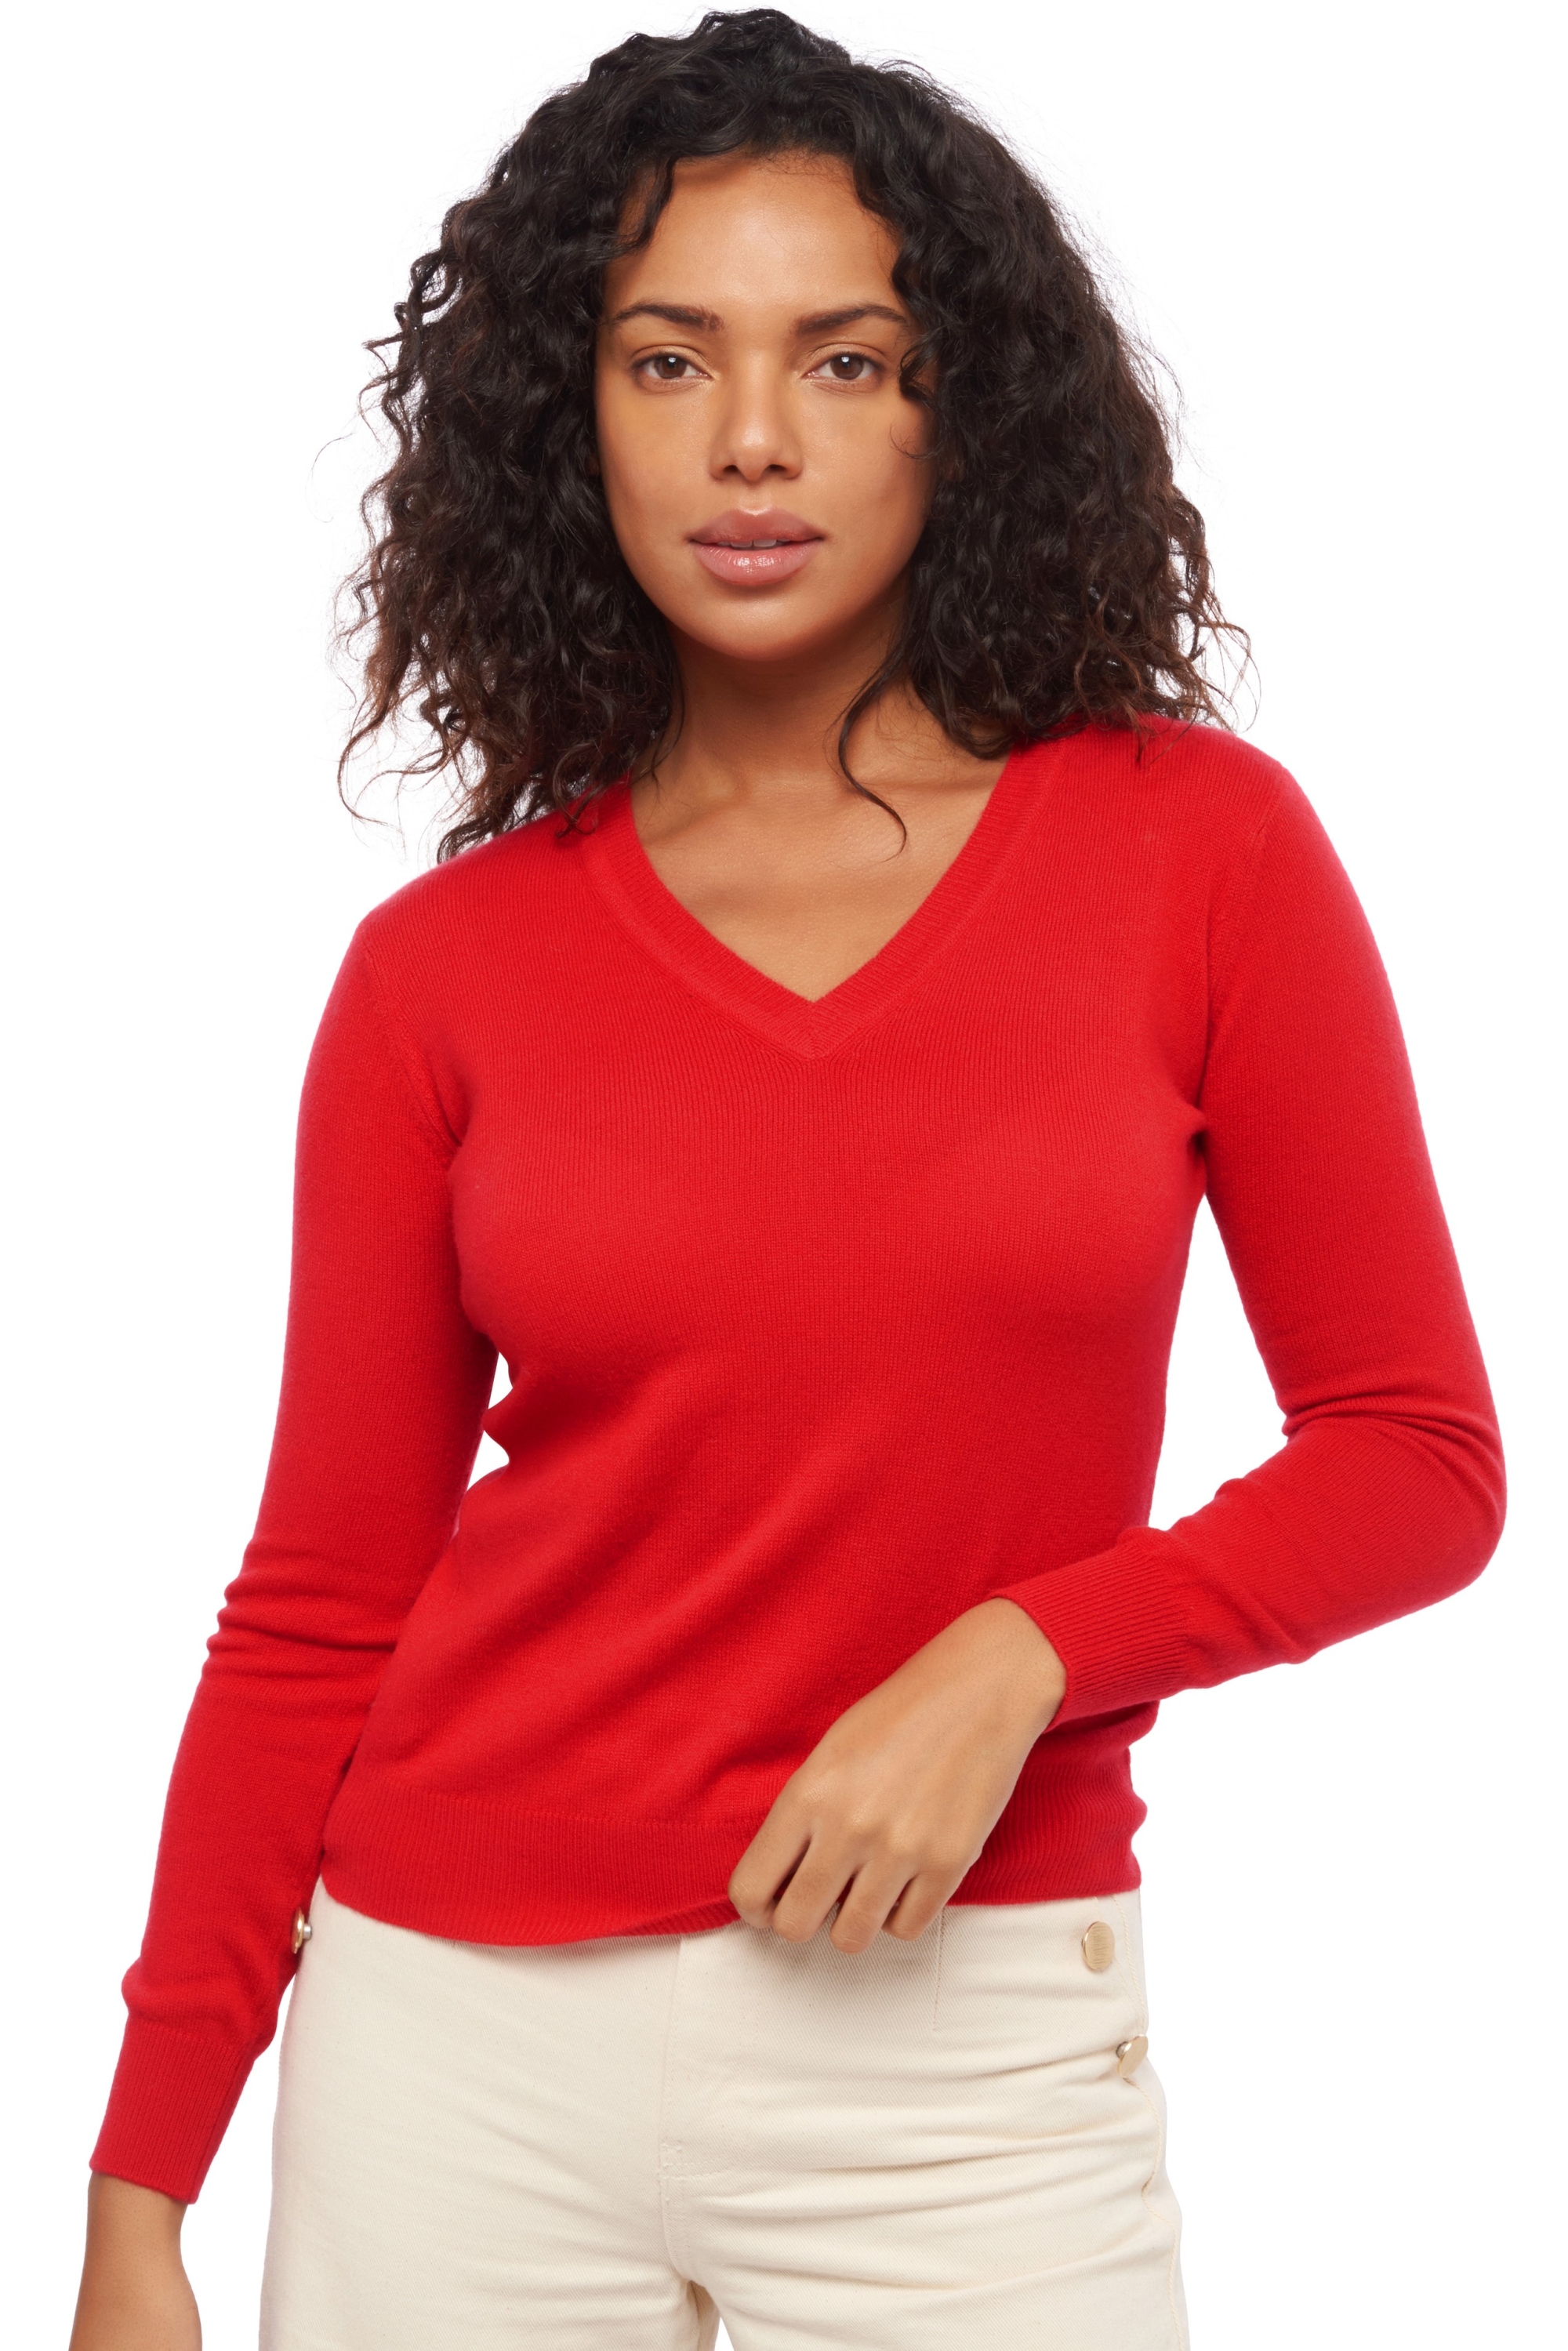 Cashmere ladies faustine blood red 3xl